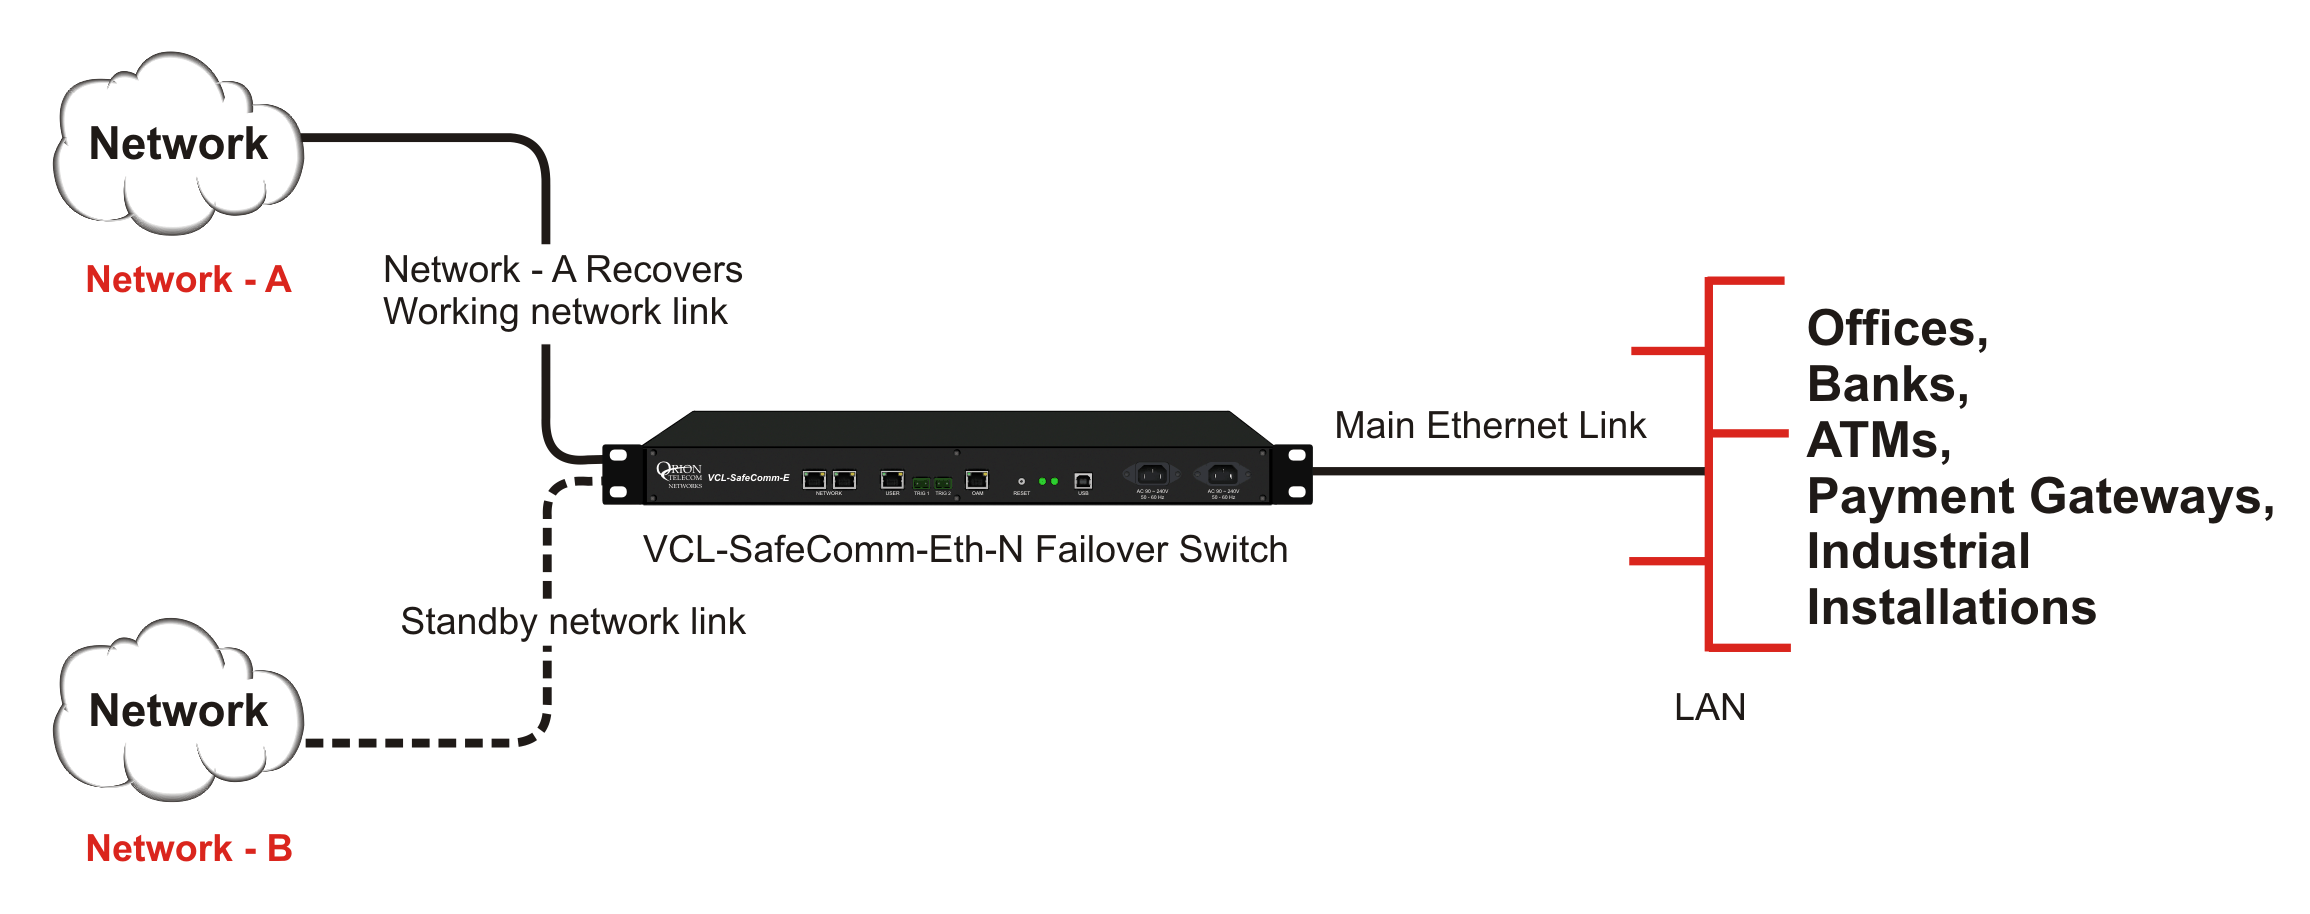 Network A recovers - Ethernet Link automatically switches and reconnected to Network A